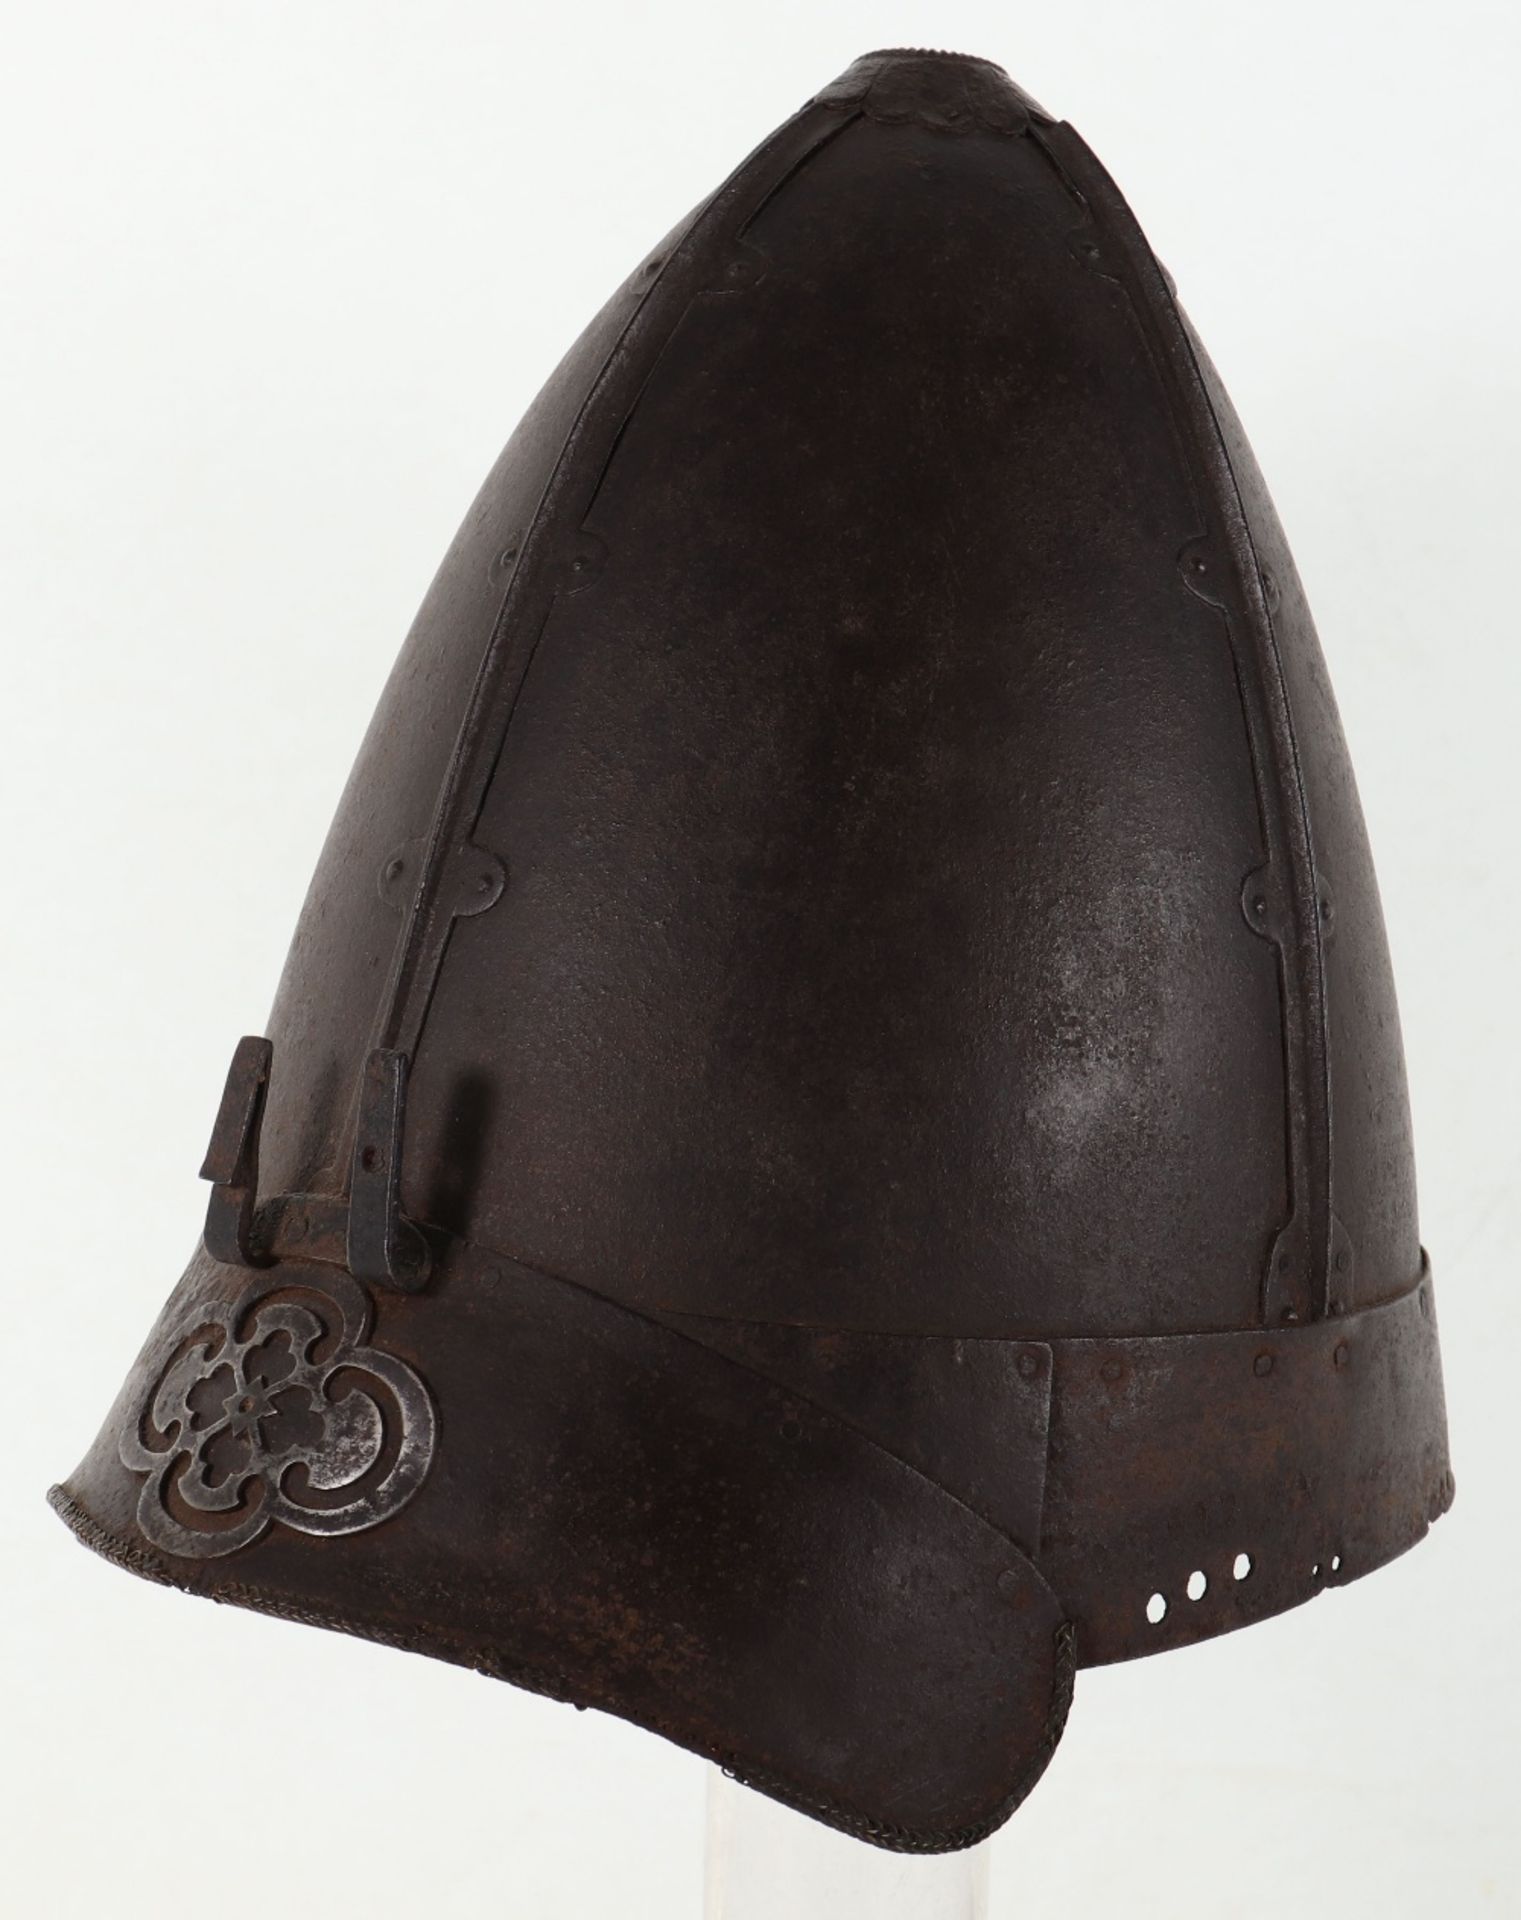 Rare Possibly Early Japanese Helmet Kabuto in the Korean Fashion - Image 2 of 12